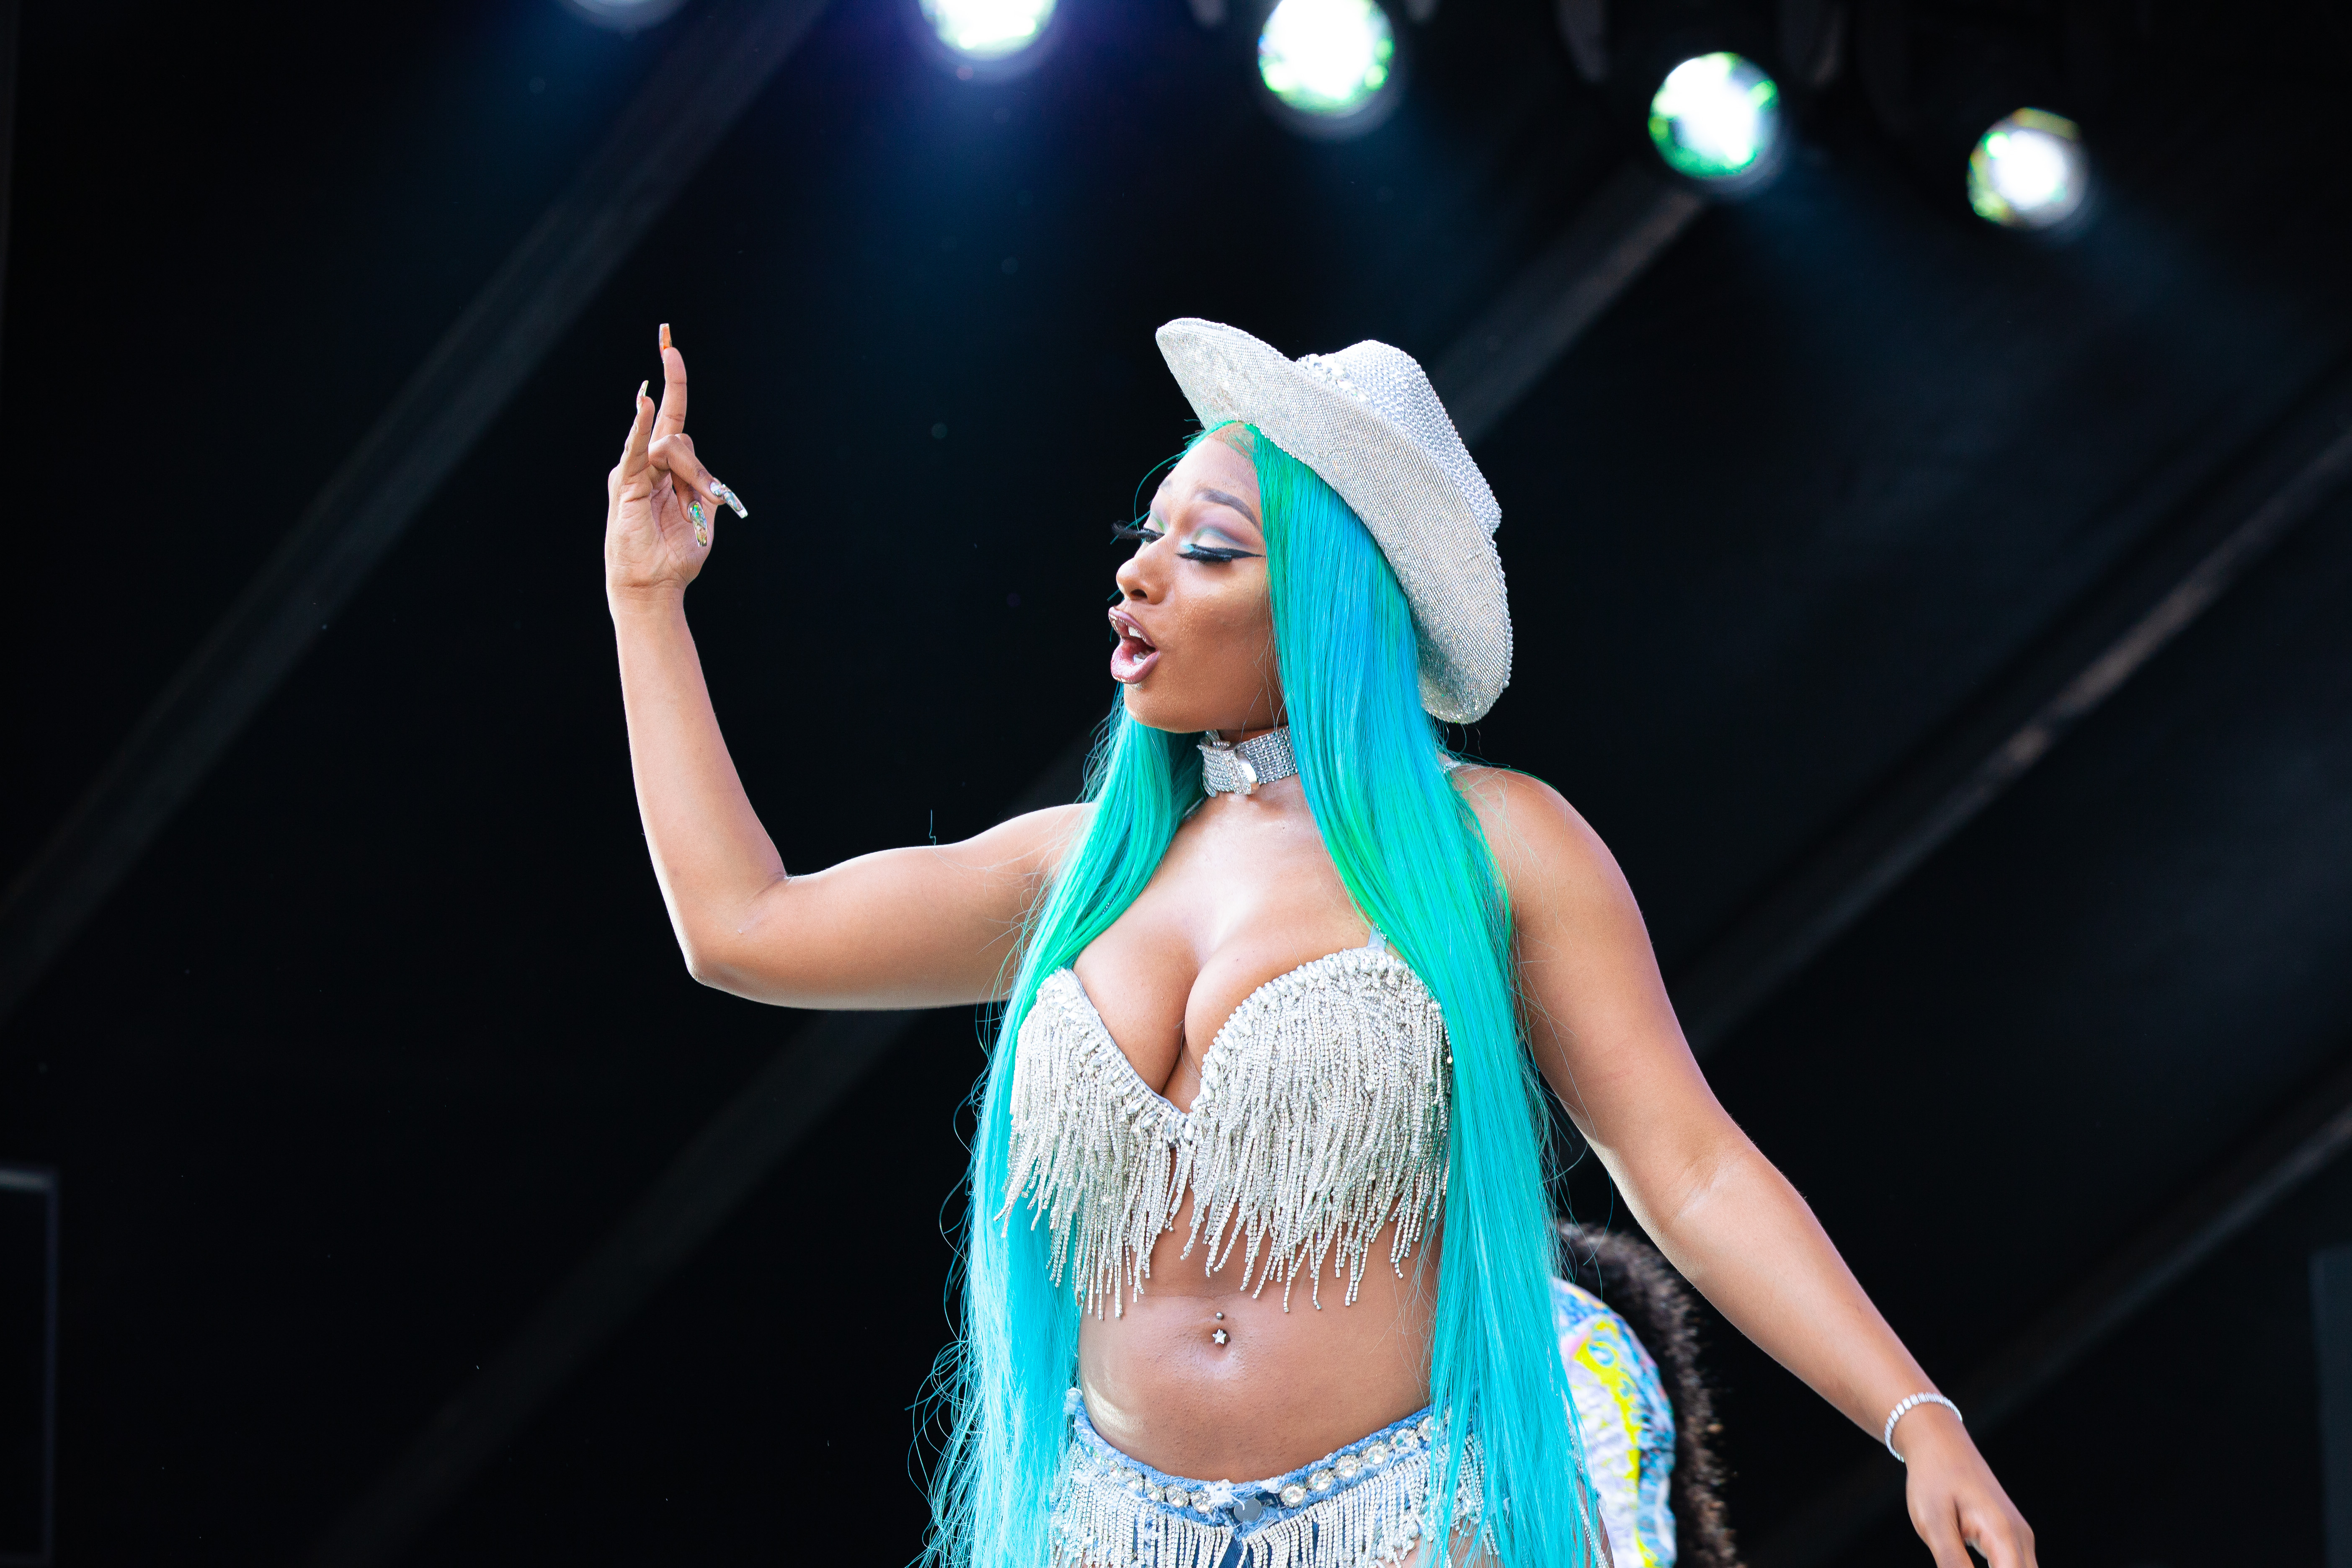 Megan Thee Stallion Sues Her Label 1501 Certified Entertainment...AGAIN